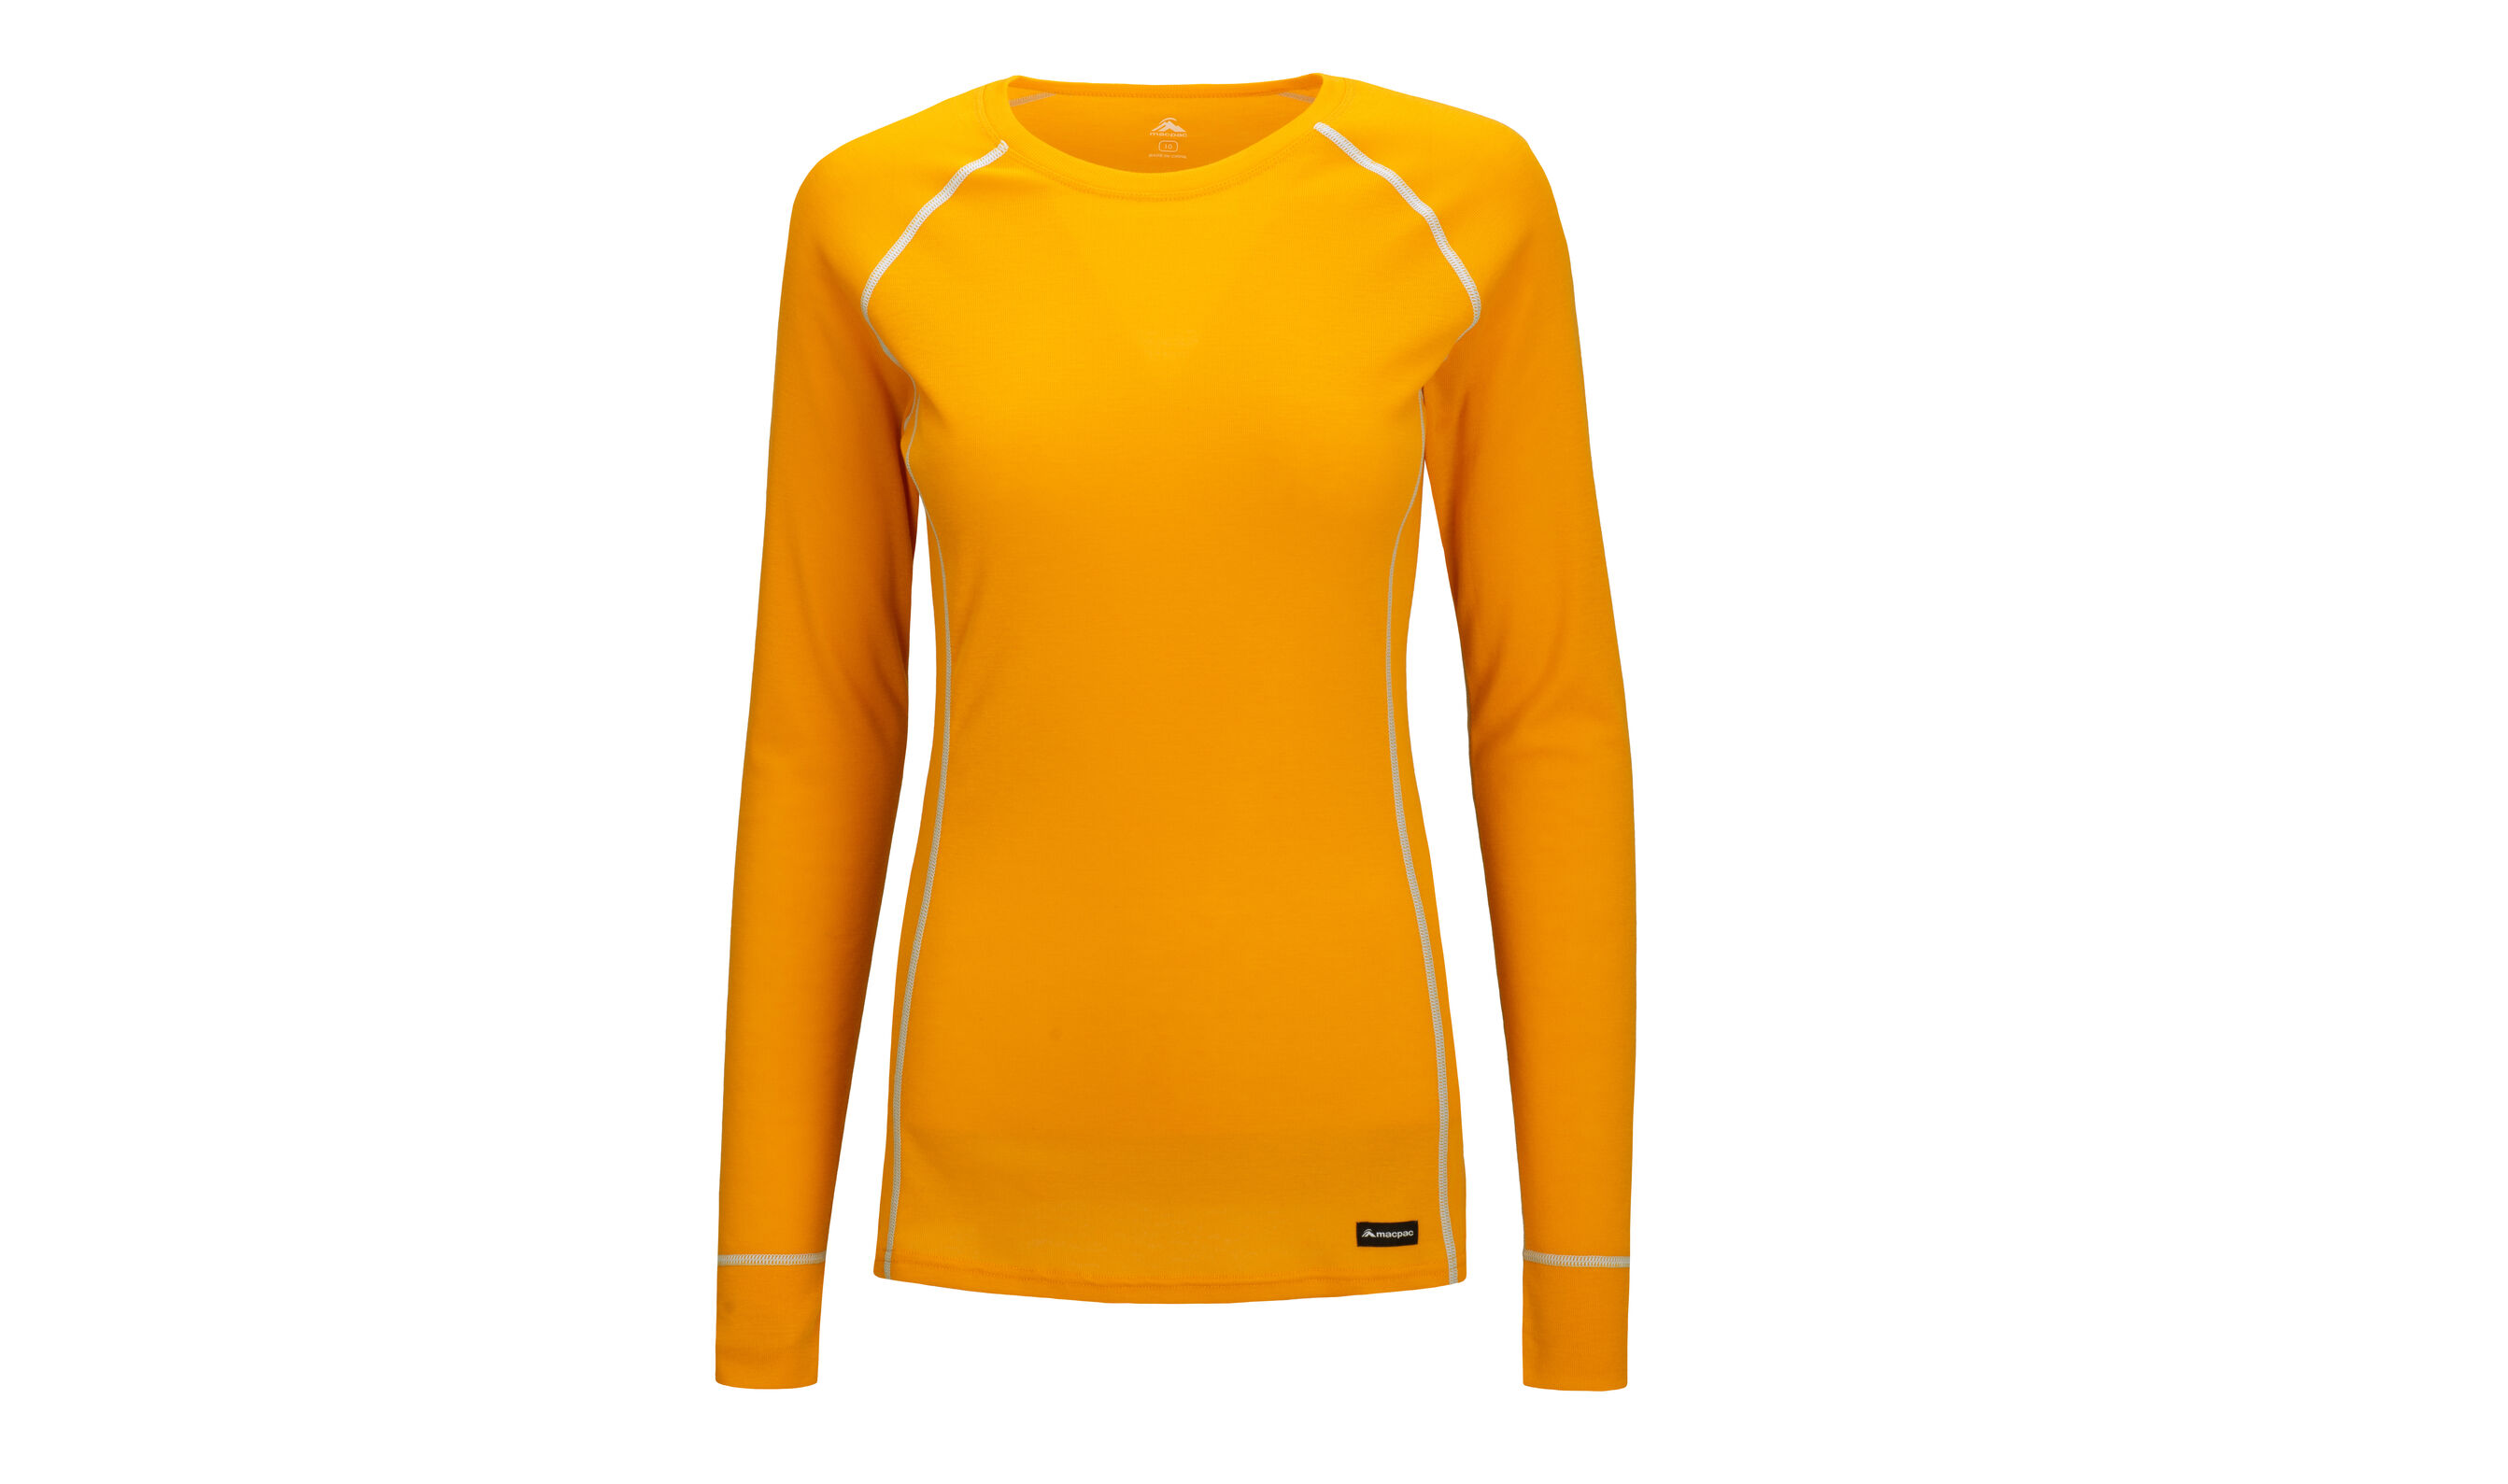 51% OFF on Macpac Women's Geothermal Long Sleeve Top now $24 [FREE Click & Collect]